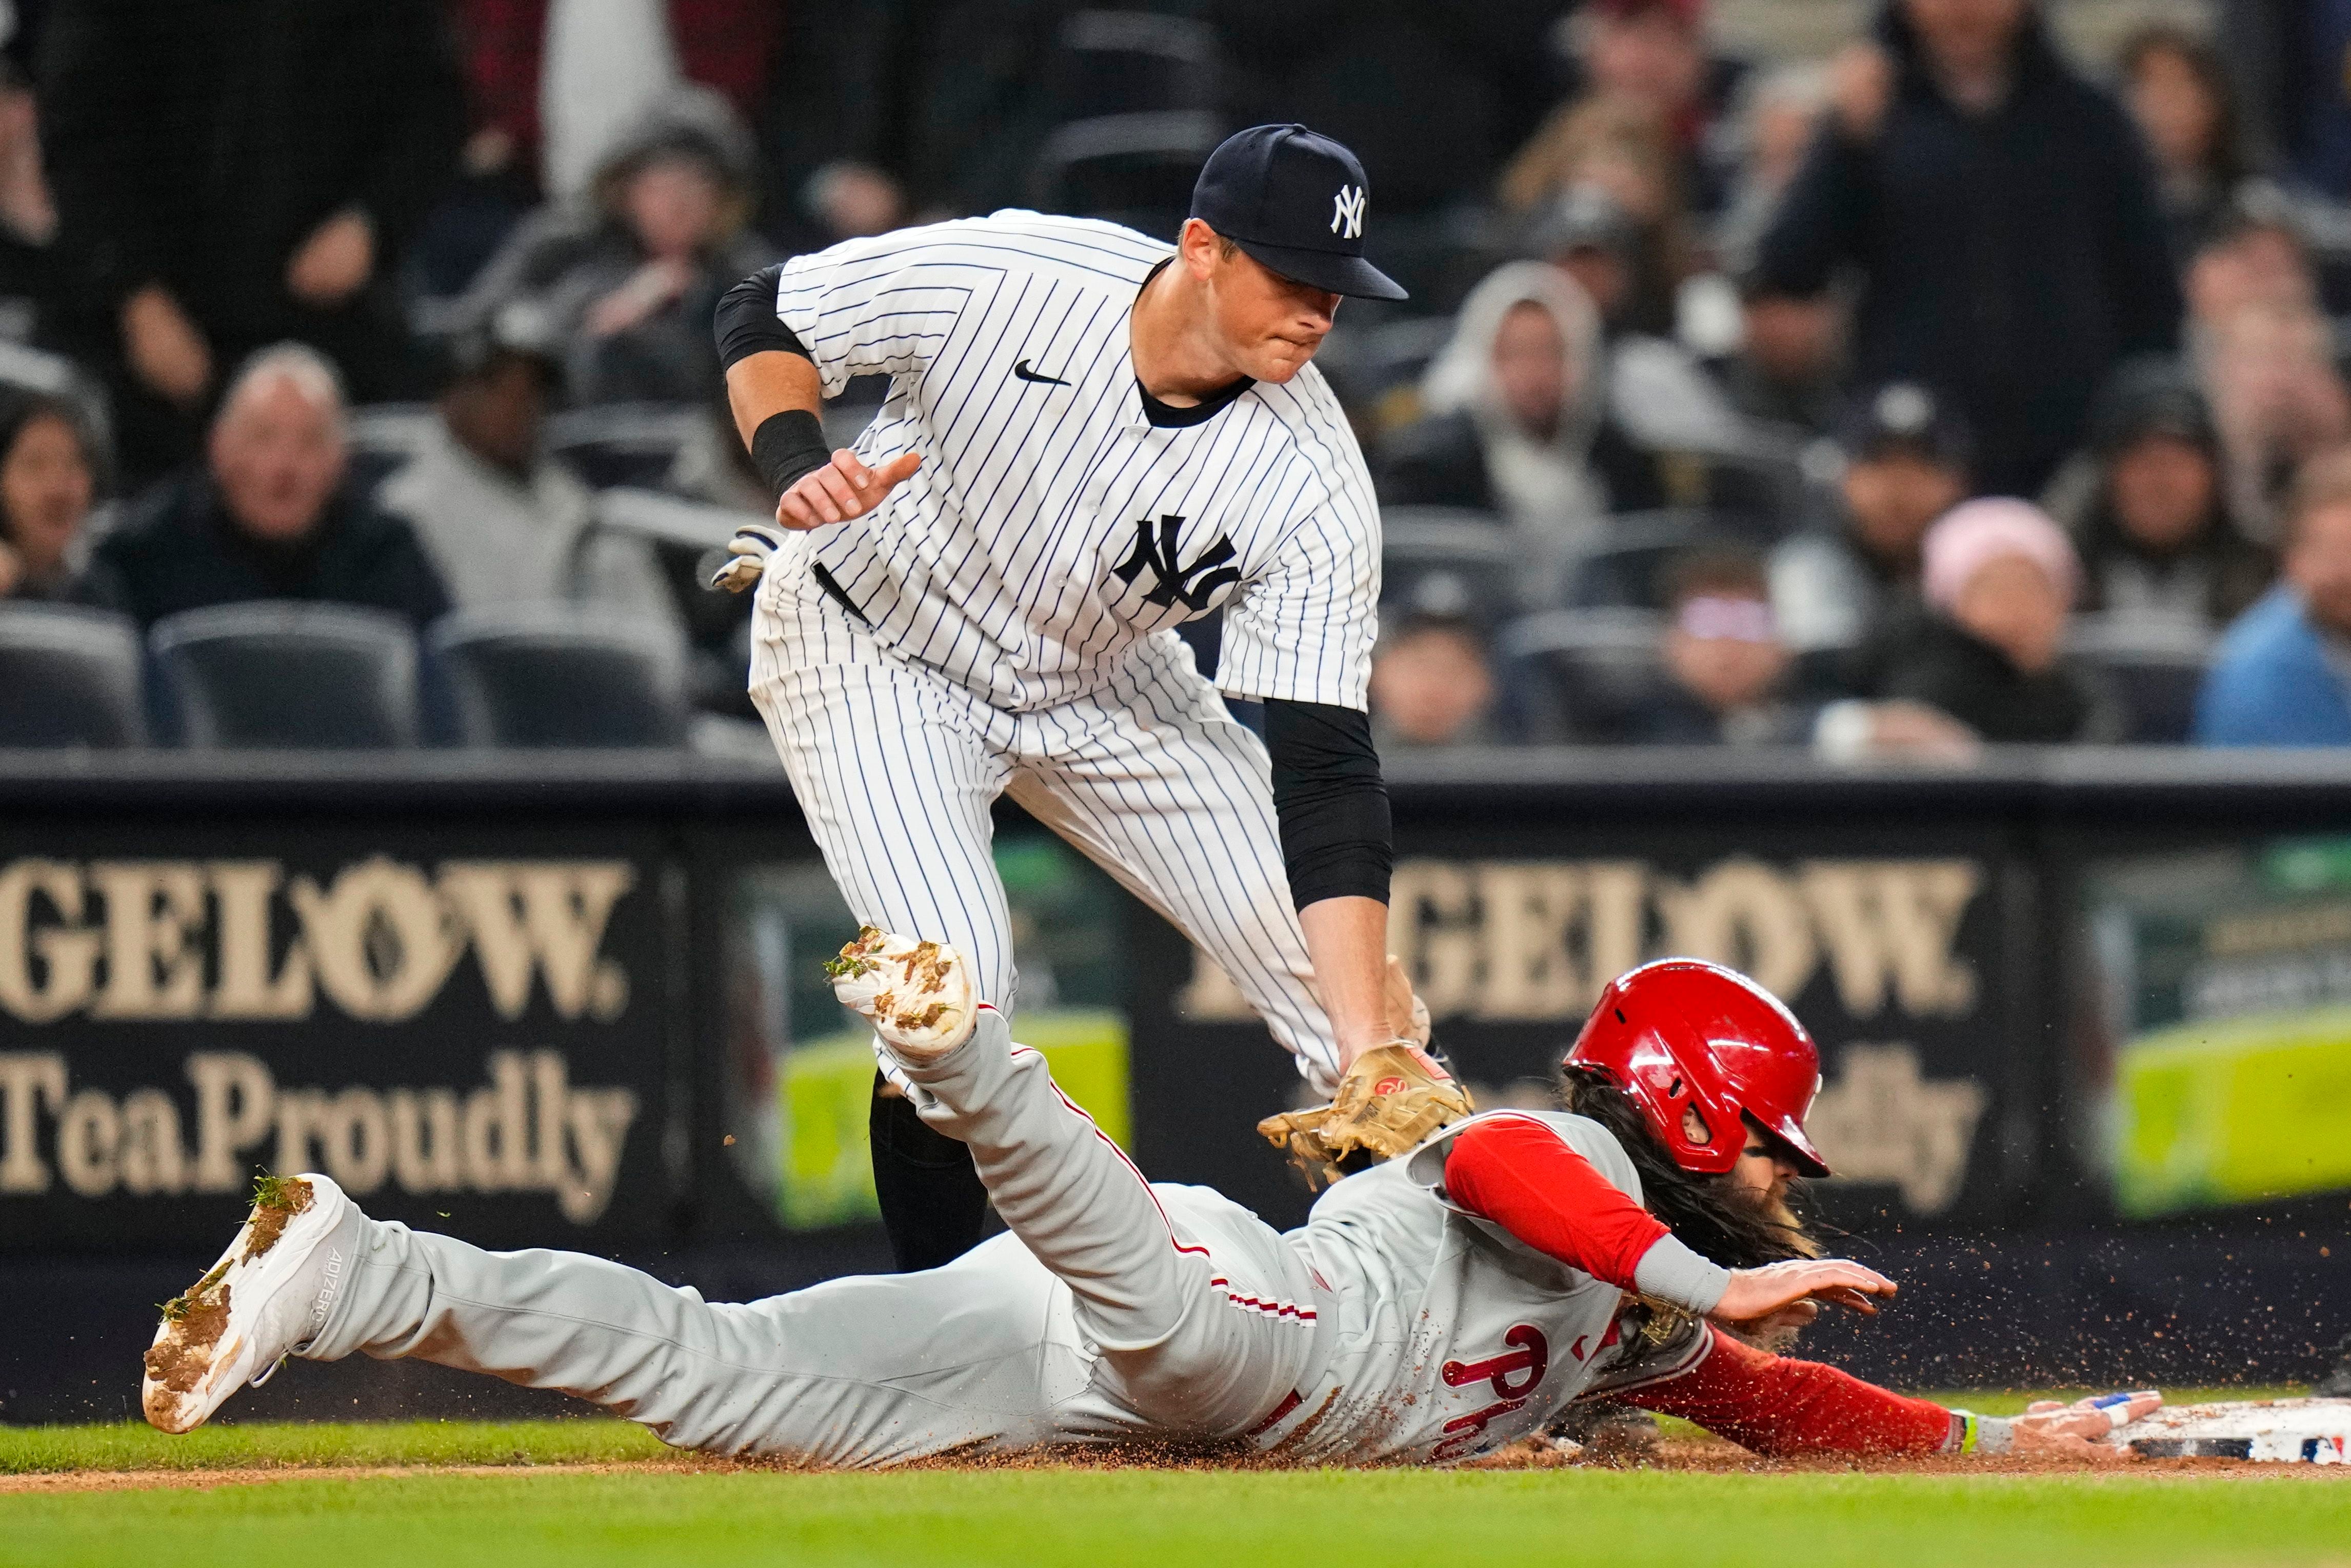 Tag: New York Yankees - Sports Info Solutions